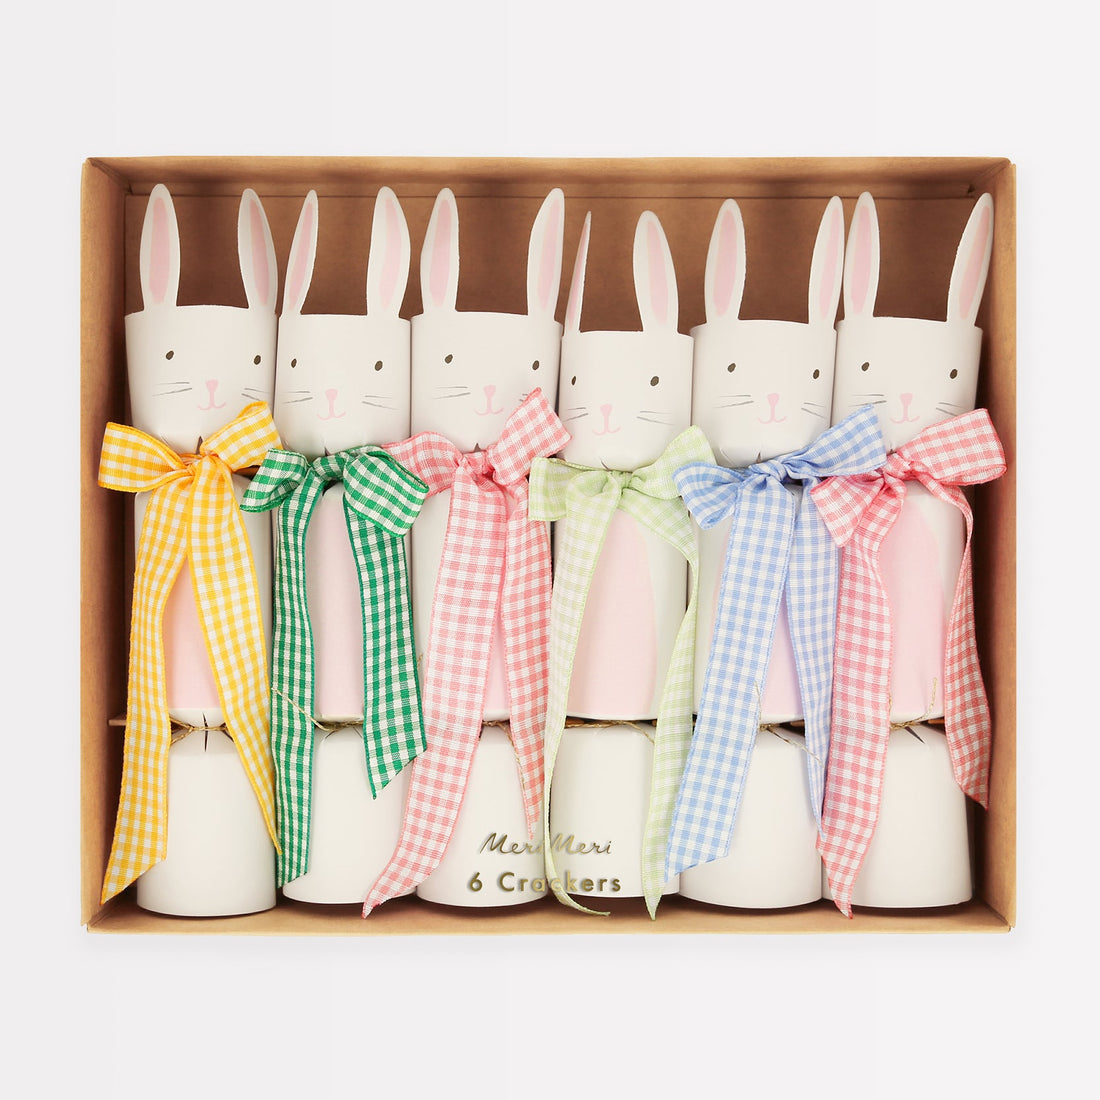 Easter bunny coasters in a Gingham Bow Bunny Crackers box by Meri Meri.